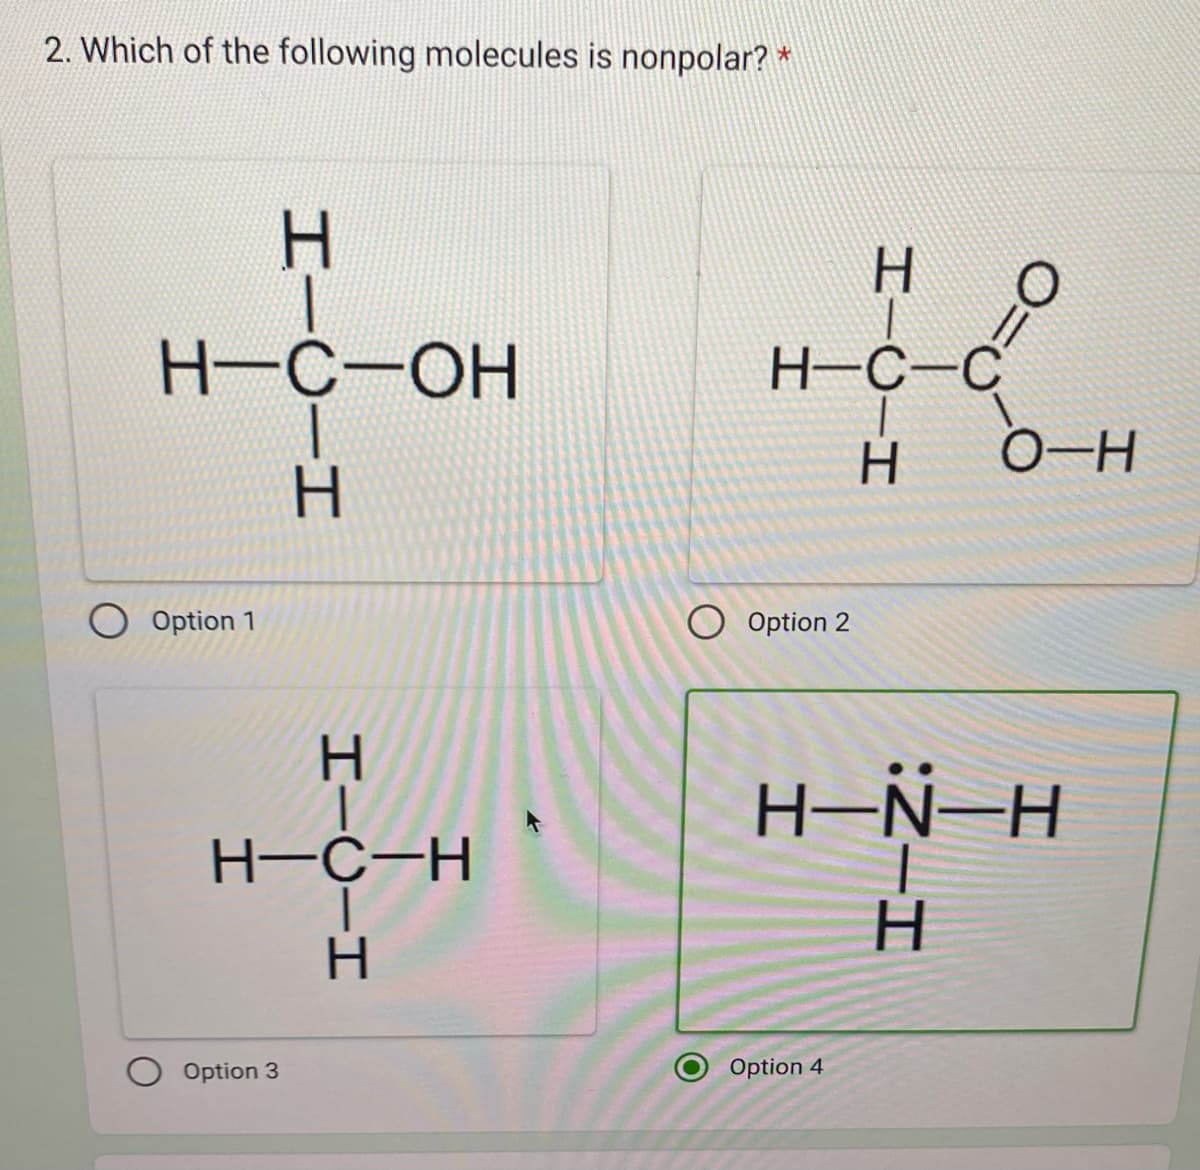 2. Which of the following molecules is nonpolar? *
O Option 1
H-C-OH
HTC-H
Н
Option 3
Н
H-C-H
HIC-H
Н
H-C-C
Option 2
HTC-H
Option 4
0=
O-H
H-N-H